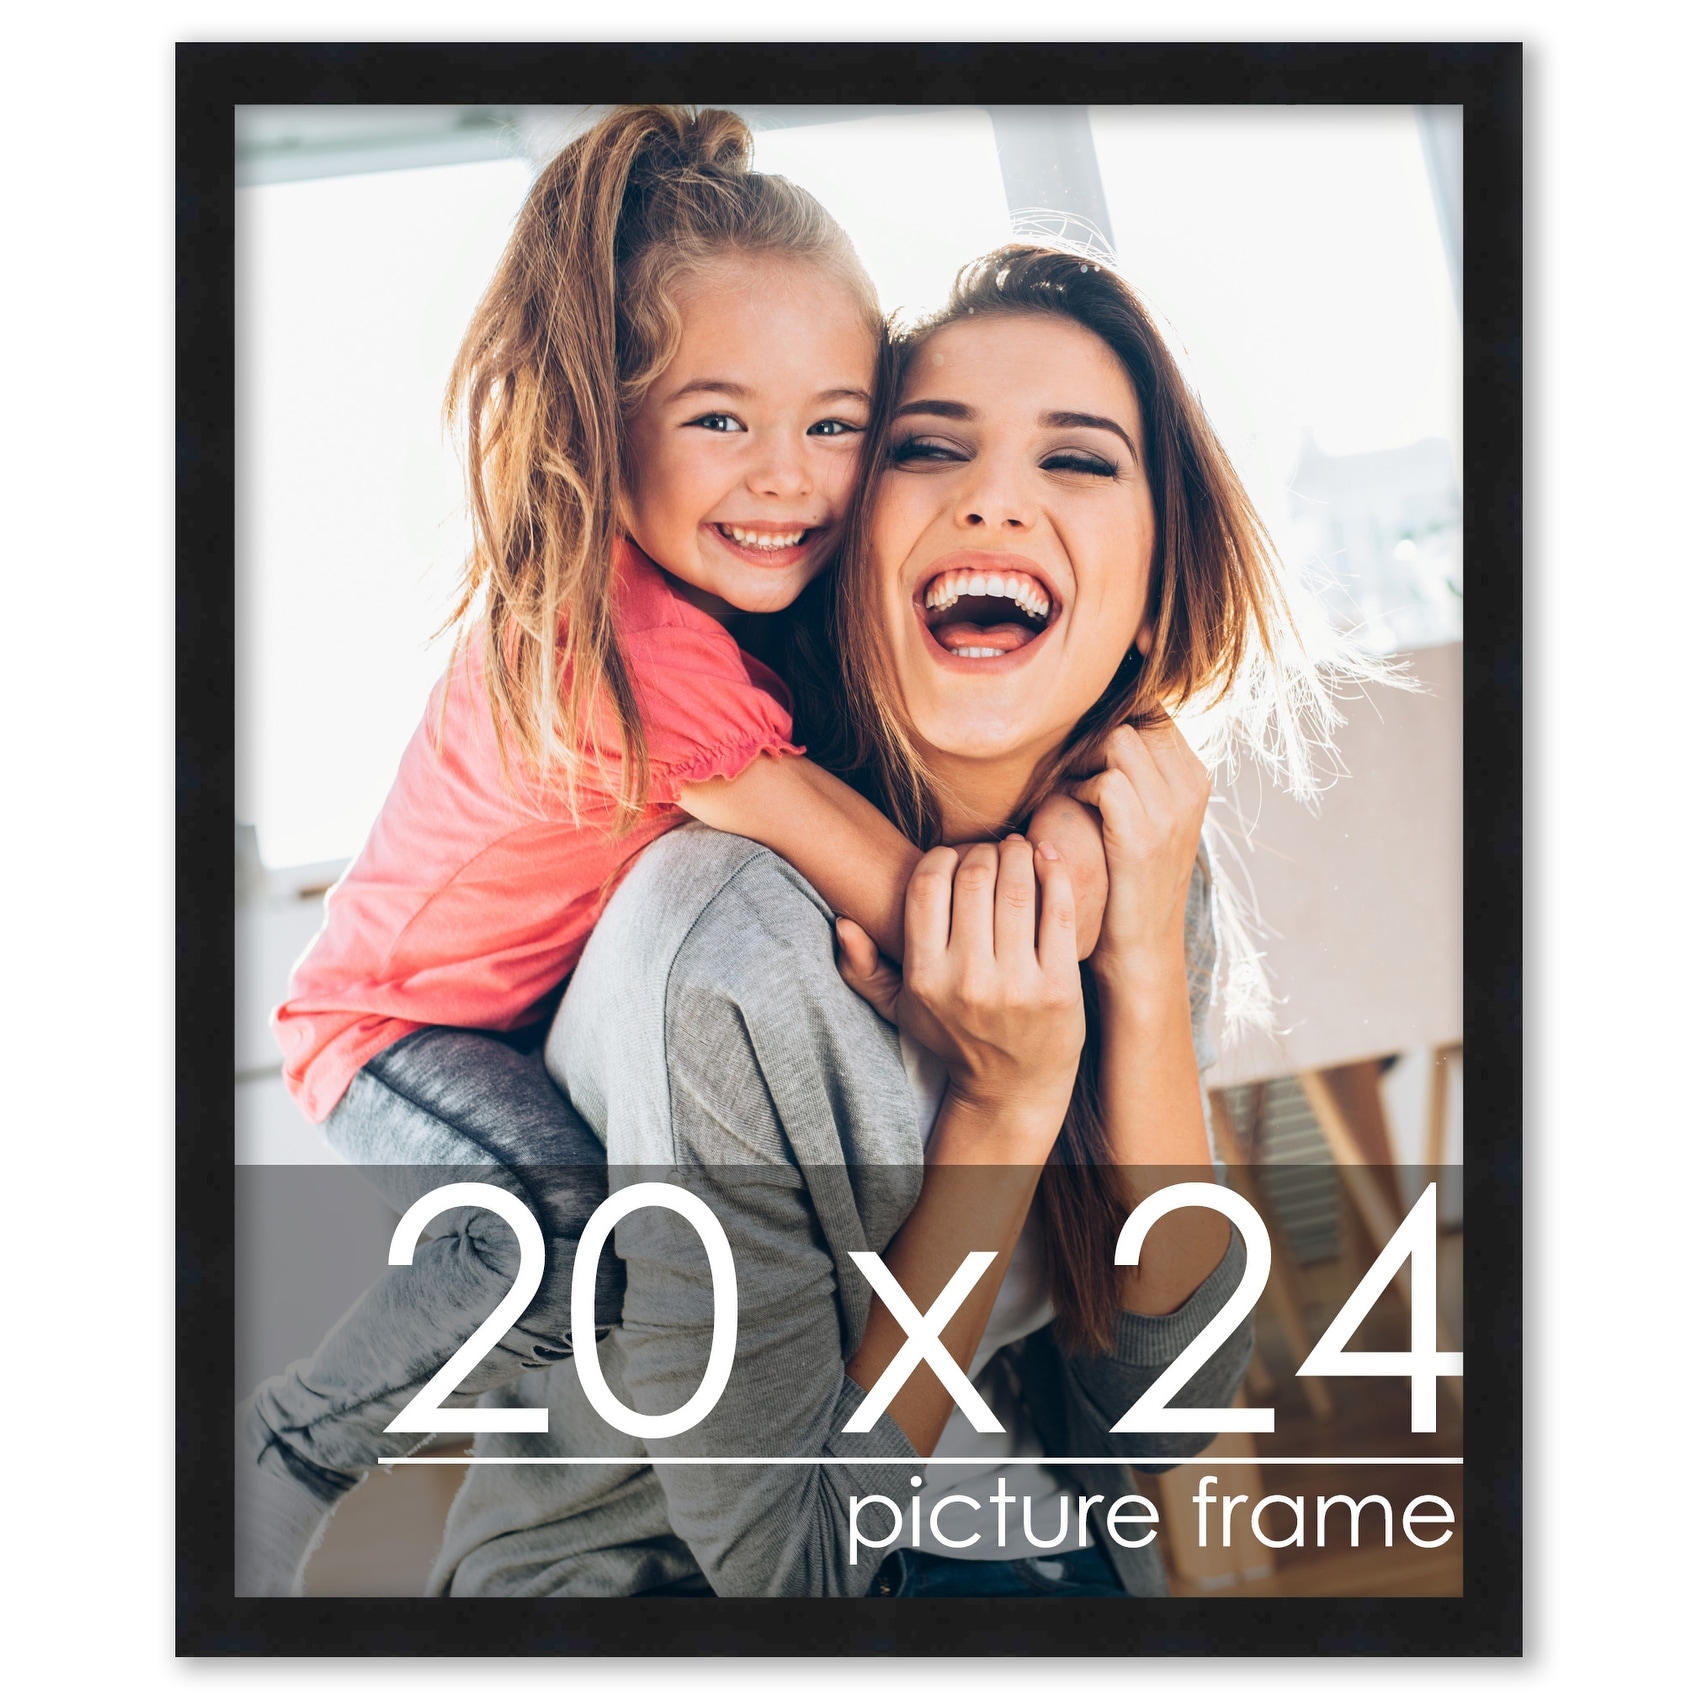 4x7 Distressed/Aged Black Complete Wood Picture Frame with UV Acrylic, Foam  Board Backing, & Hardware